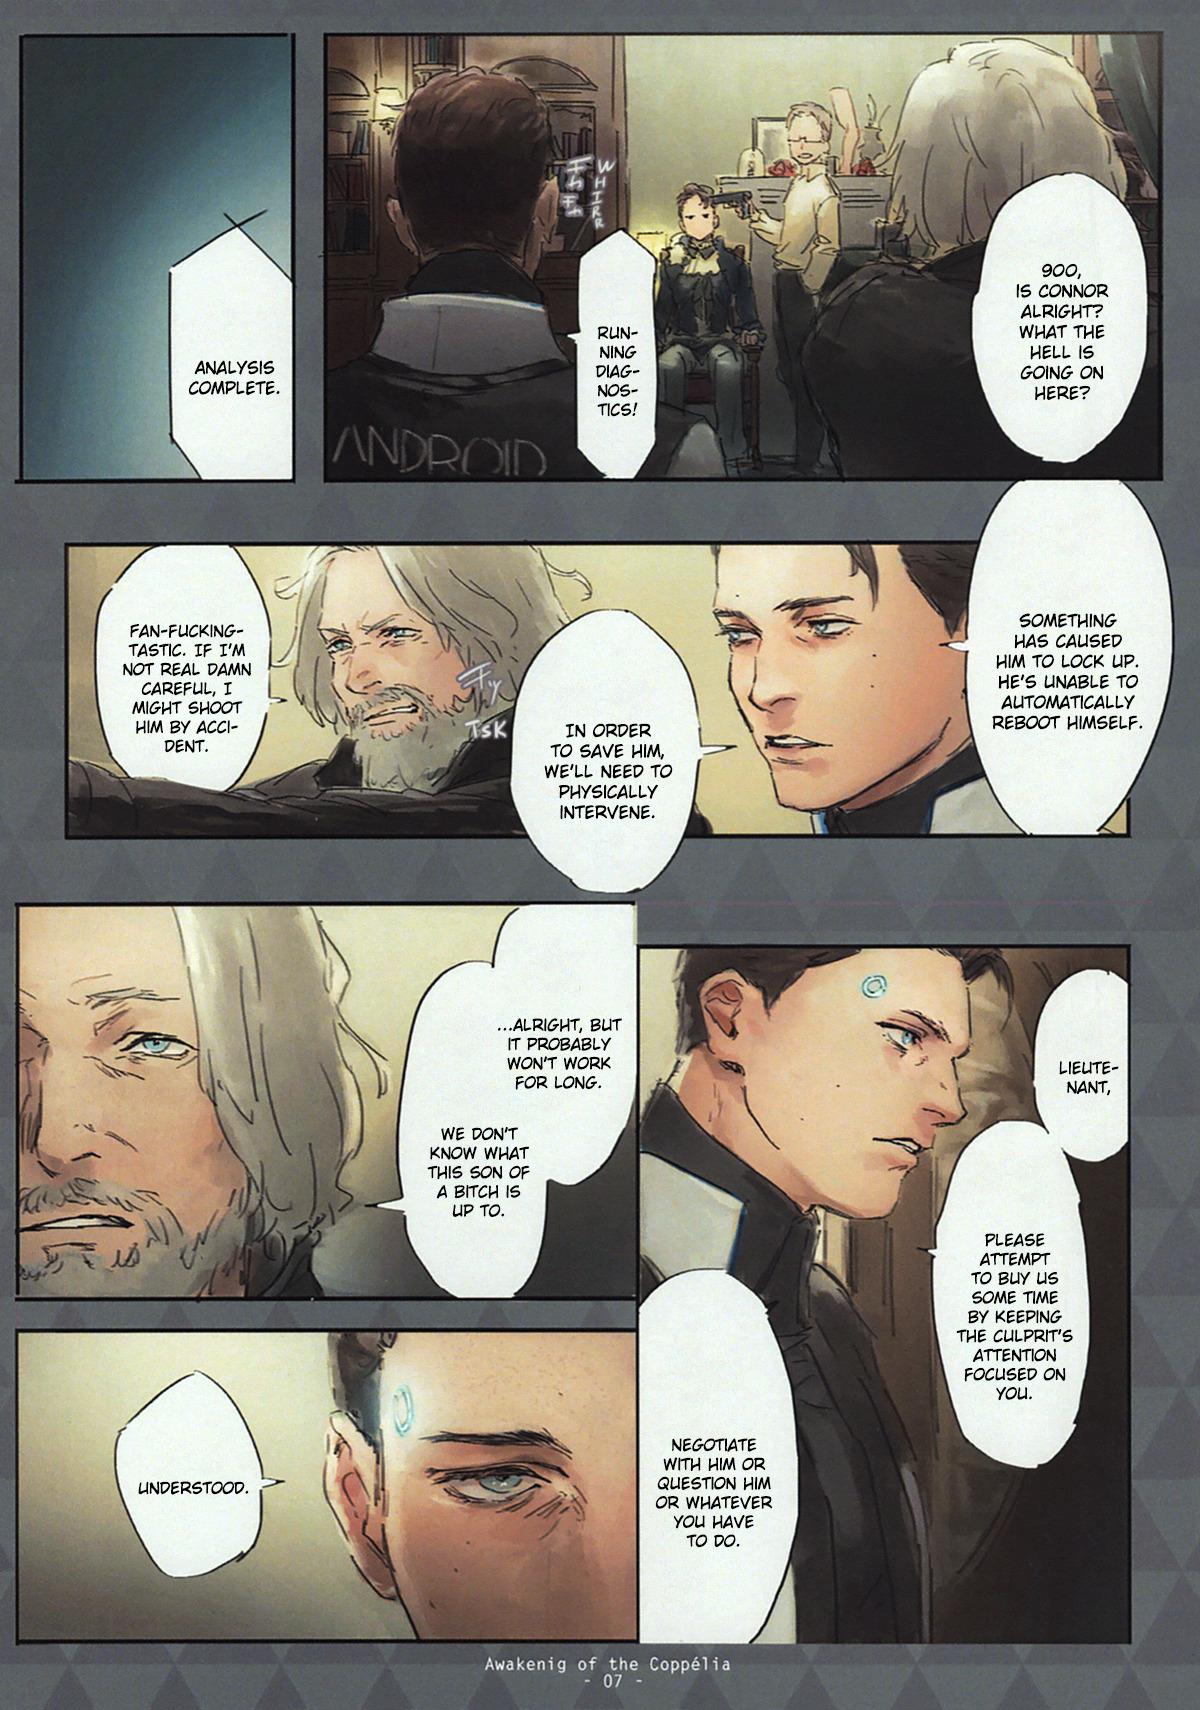 Blow Job Contest Awakening of Copper - Detroit become human Shower - Page 4